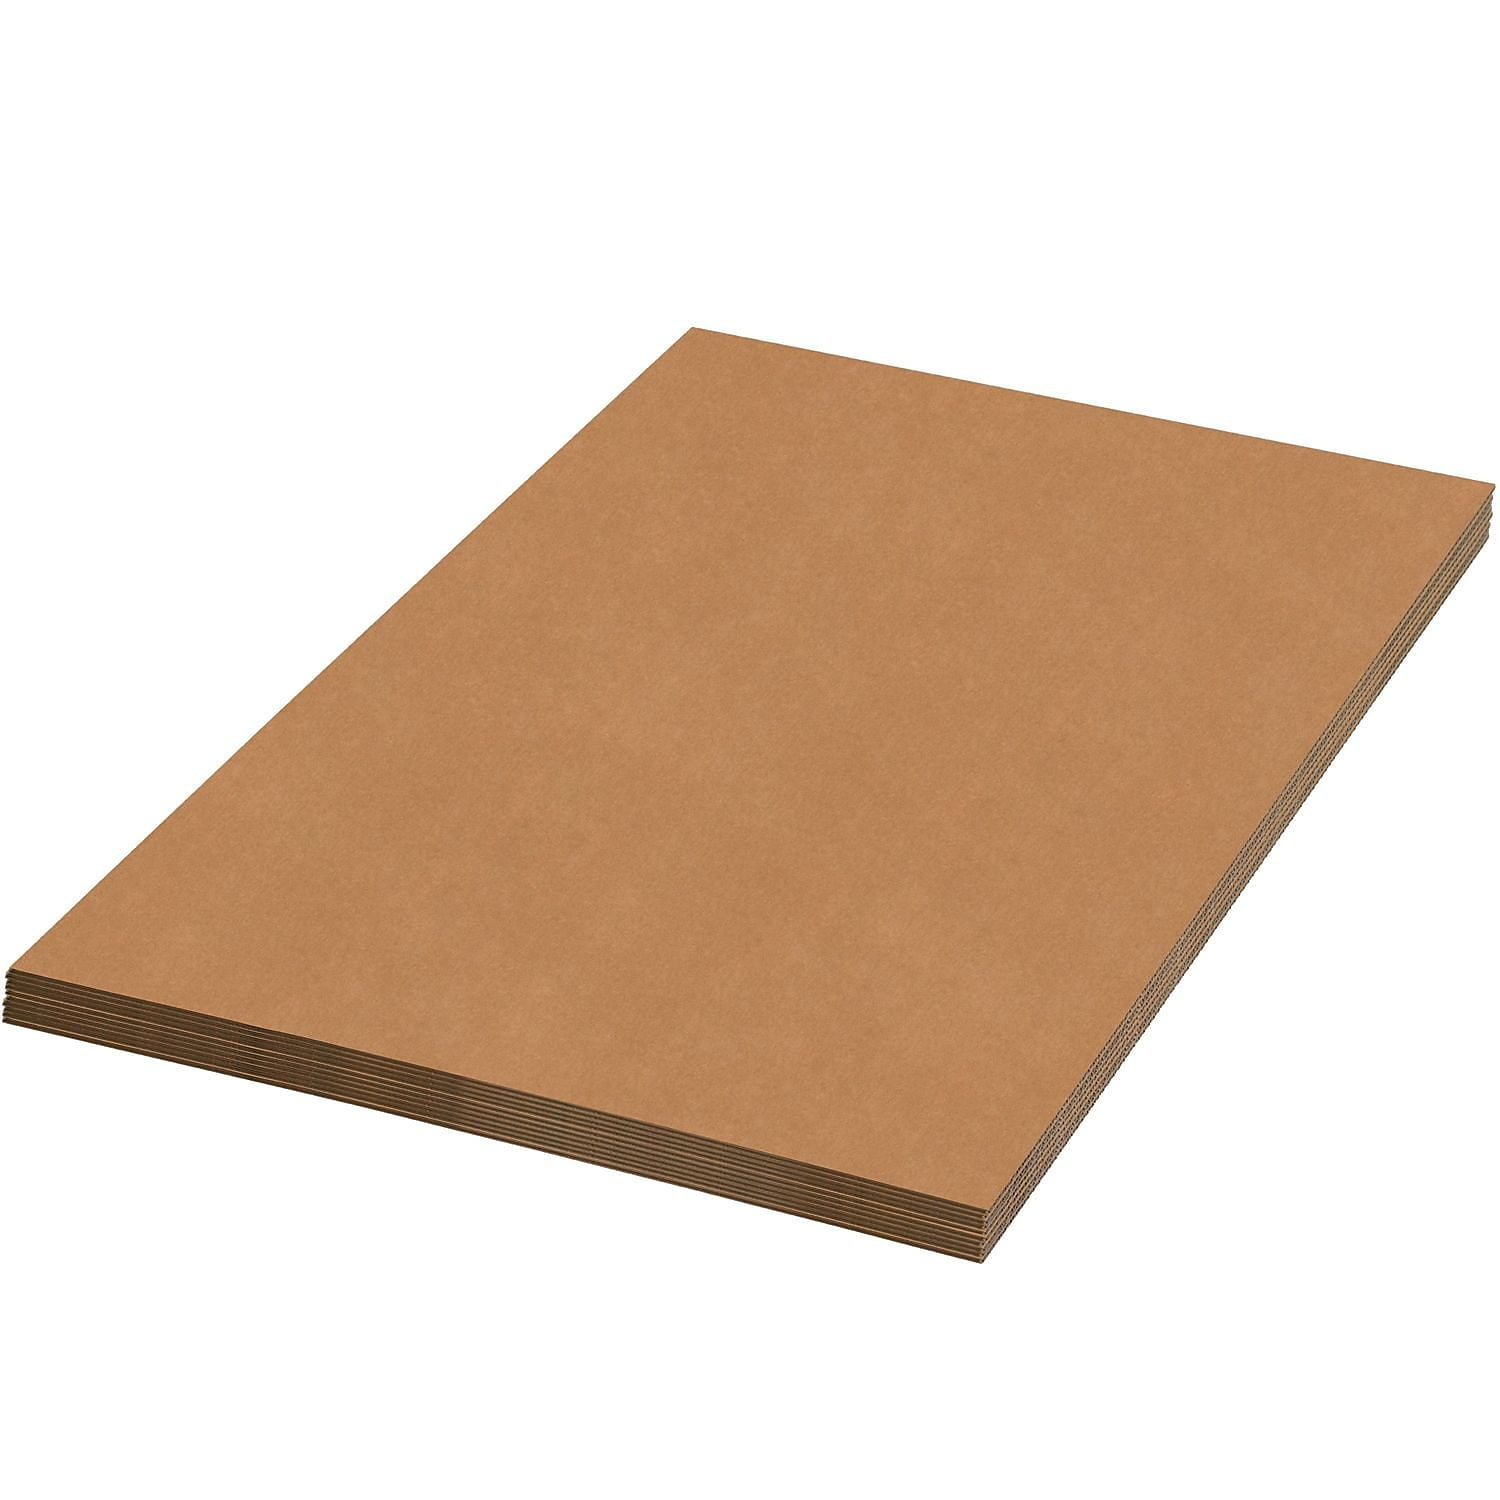 9 x 9 Square Brown Chipboard – Medium Weight 30 Point Thick Cardboard, Hardboard, Custom, Product and Environmentally Friendly Packaging Boxes